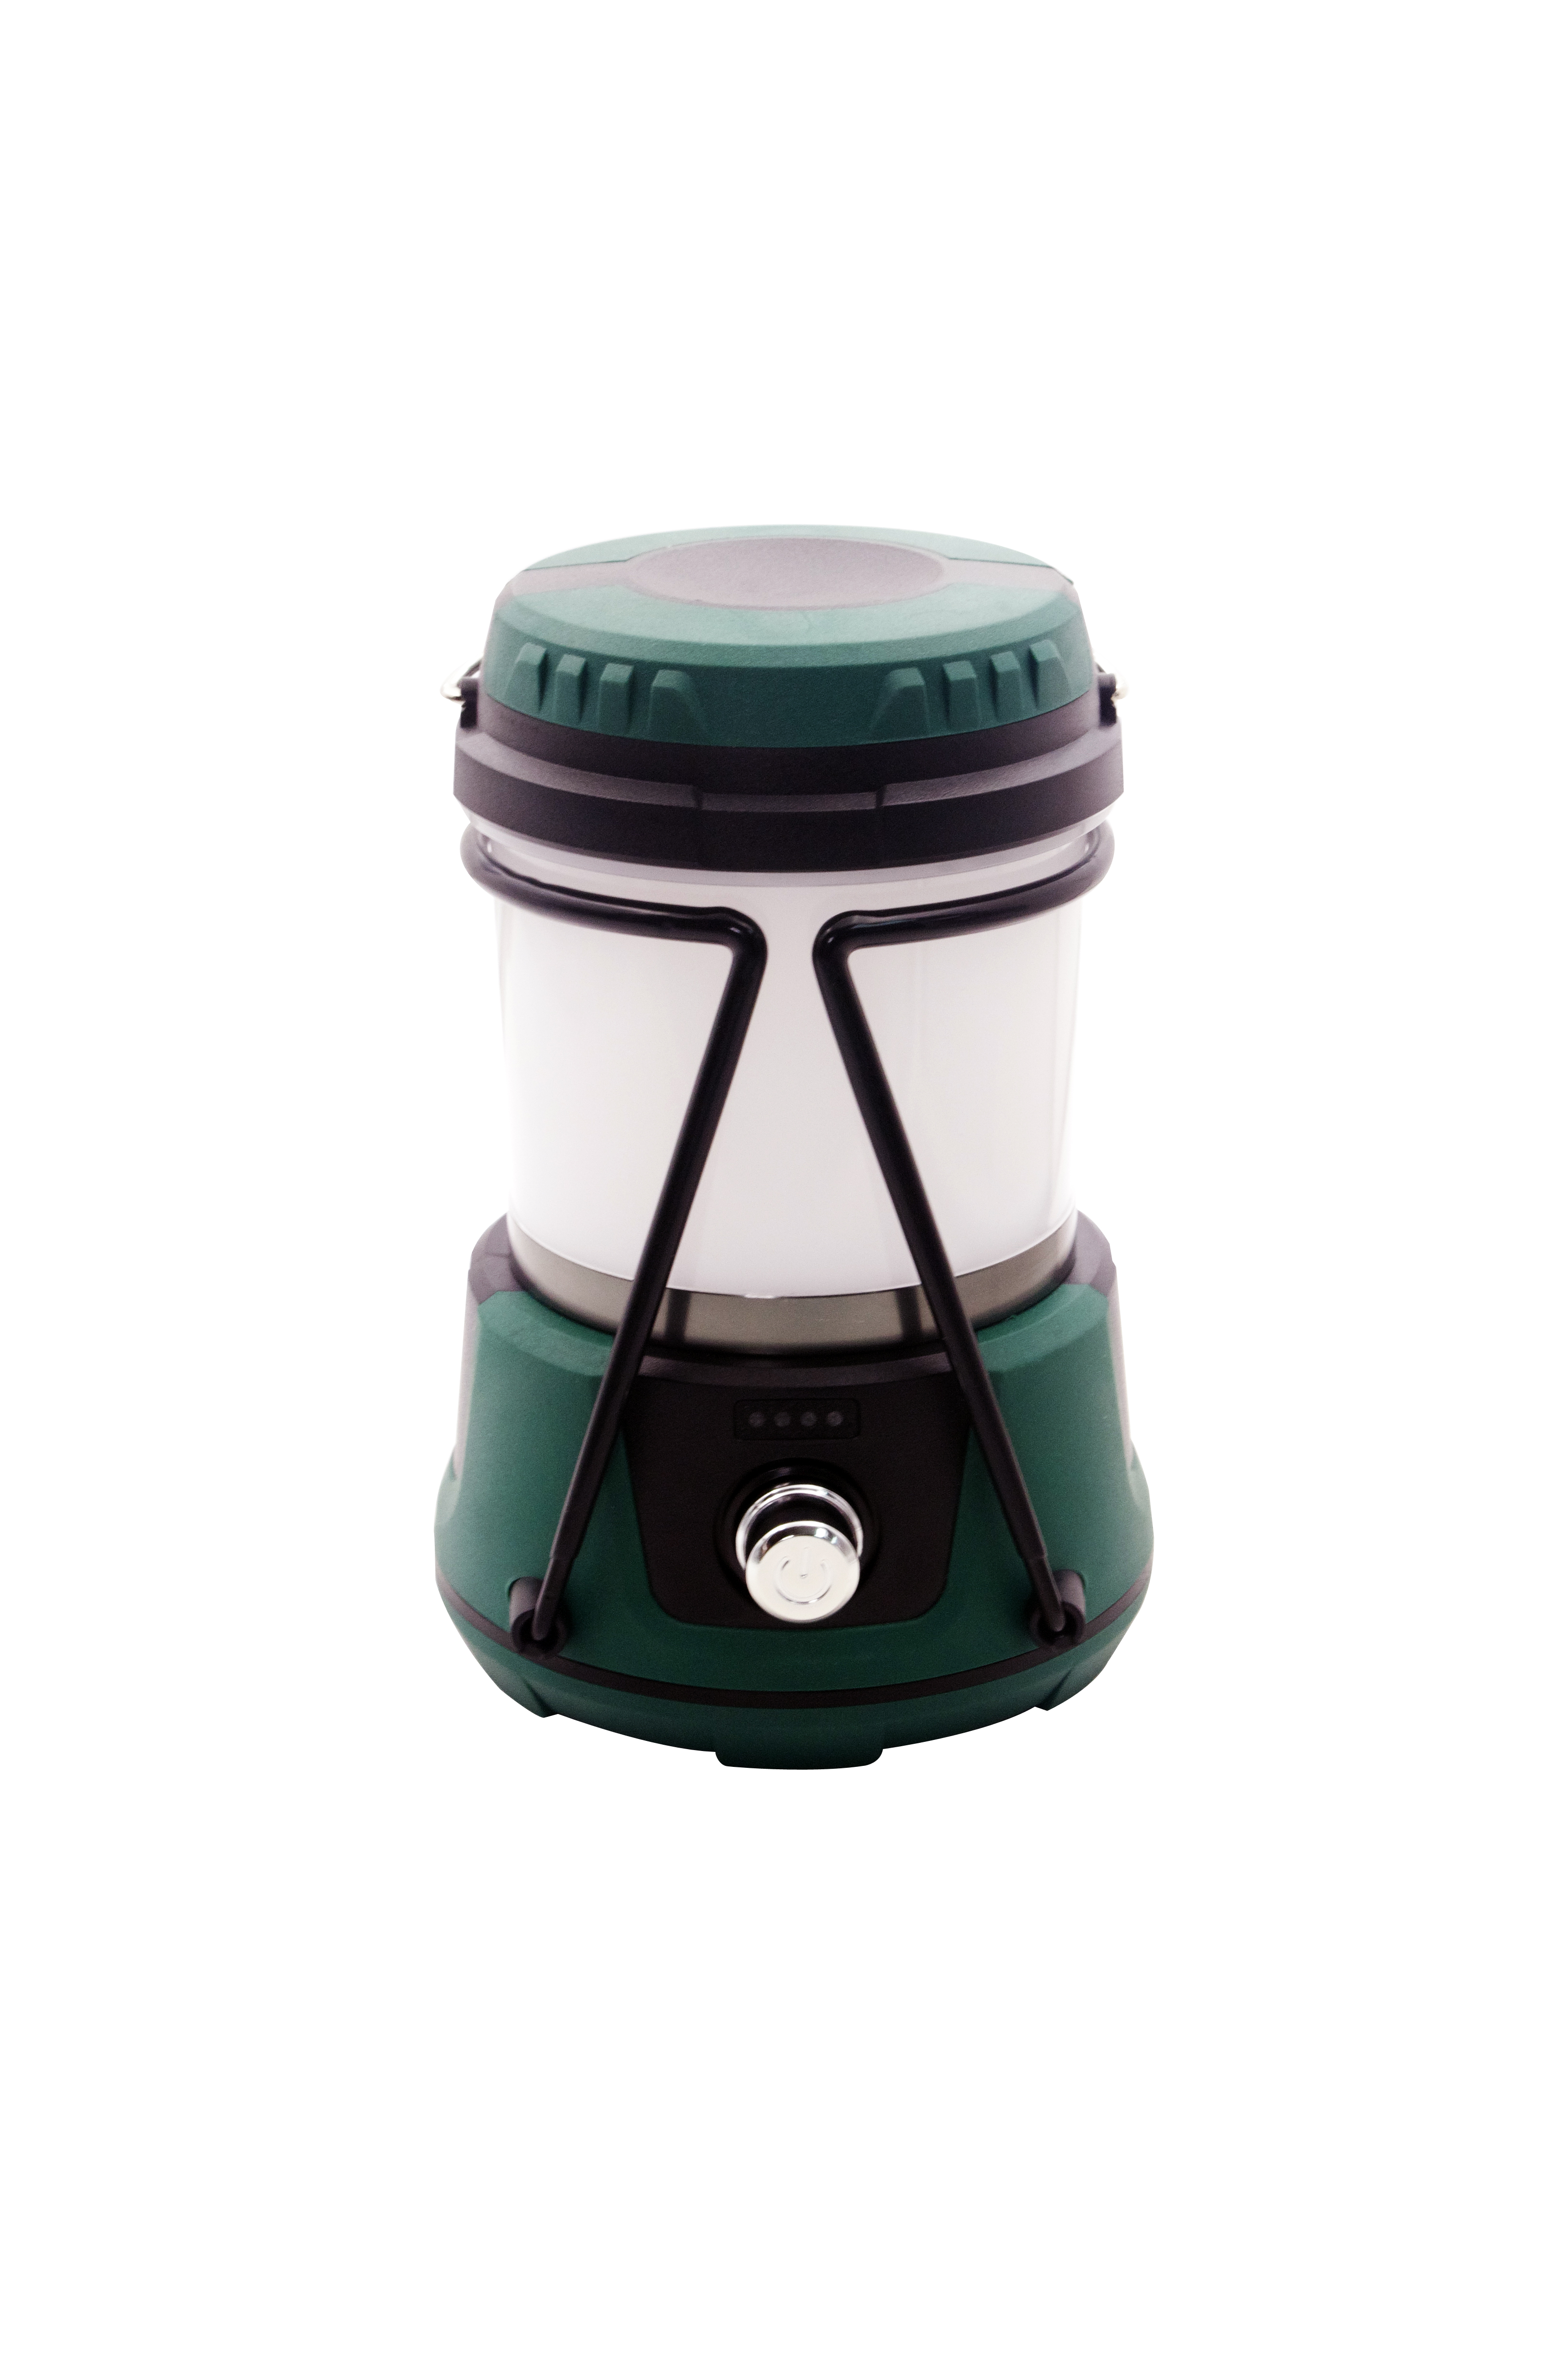 600 lumens LED camping lantern L22310 with metal handle and two flexible stands